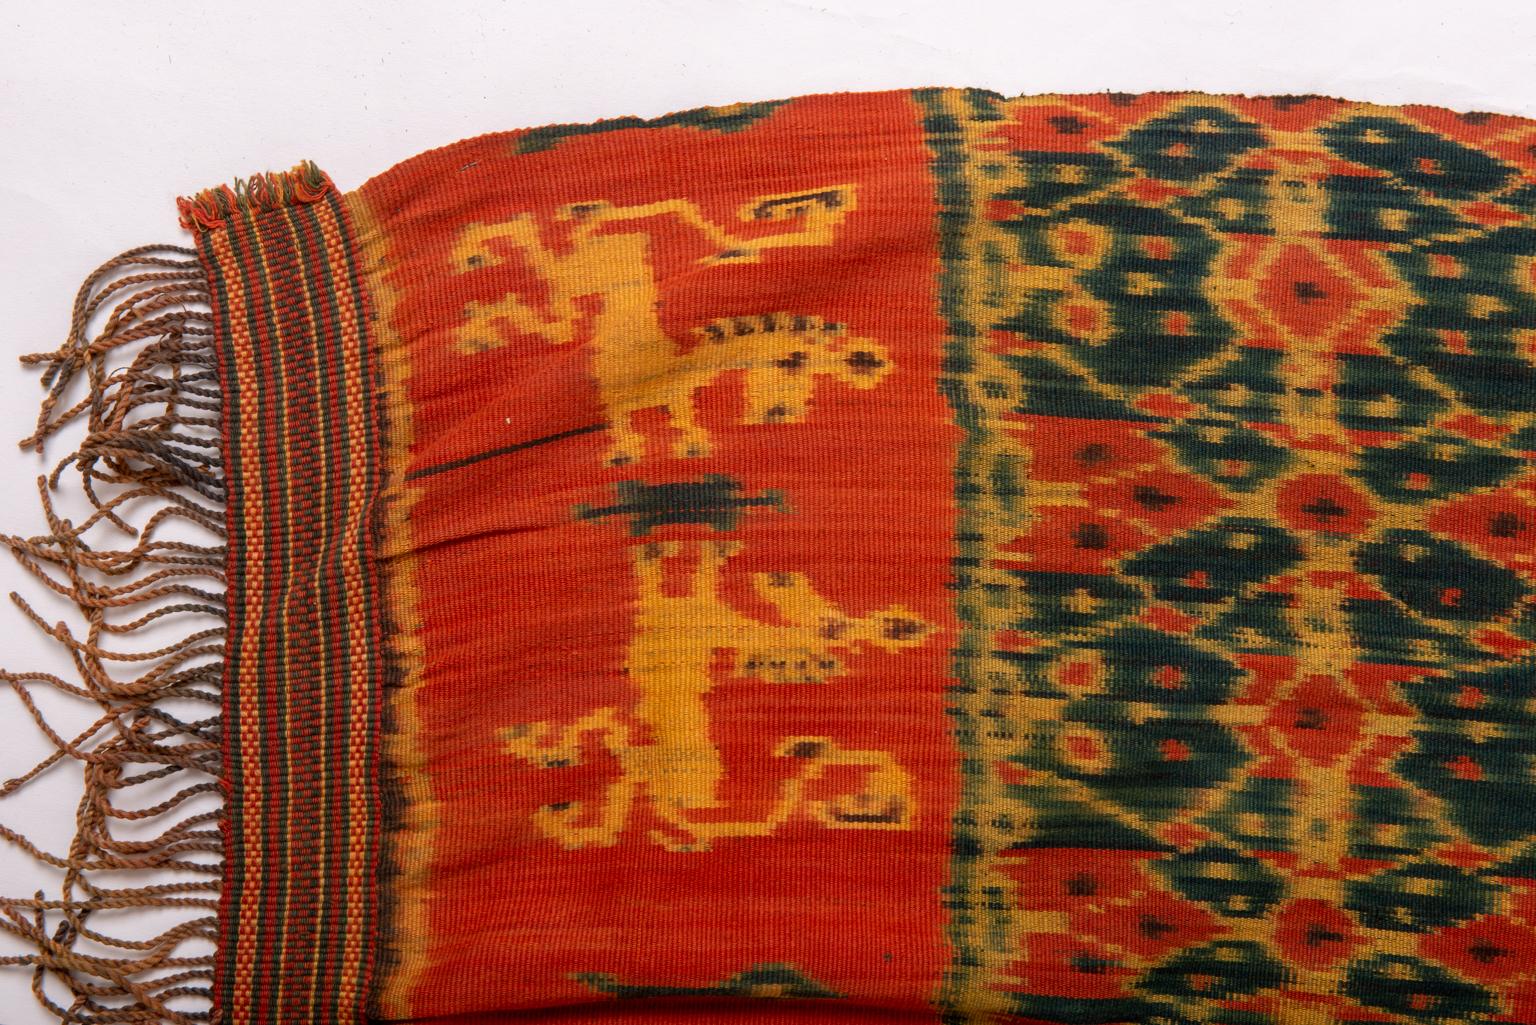 Hand-Woven  Indonesian IKAT Textile Panel